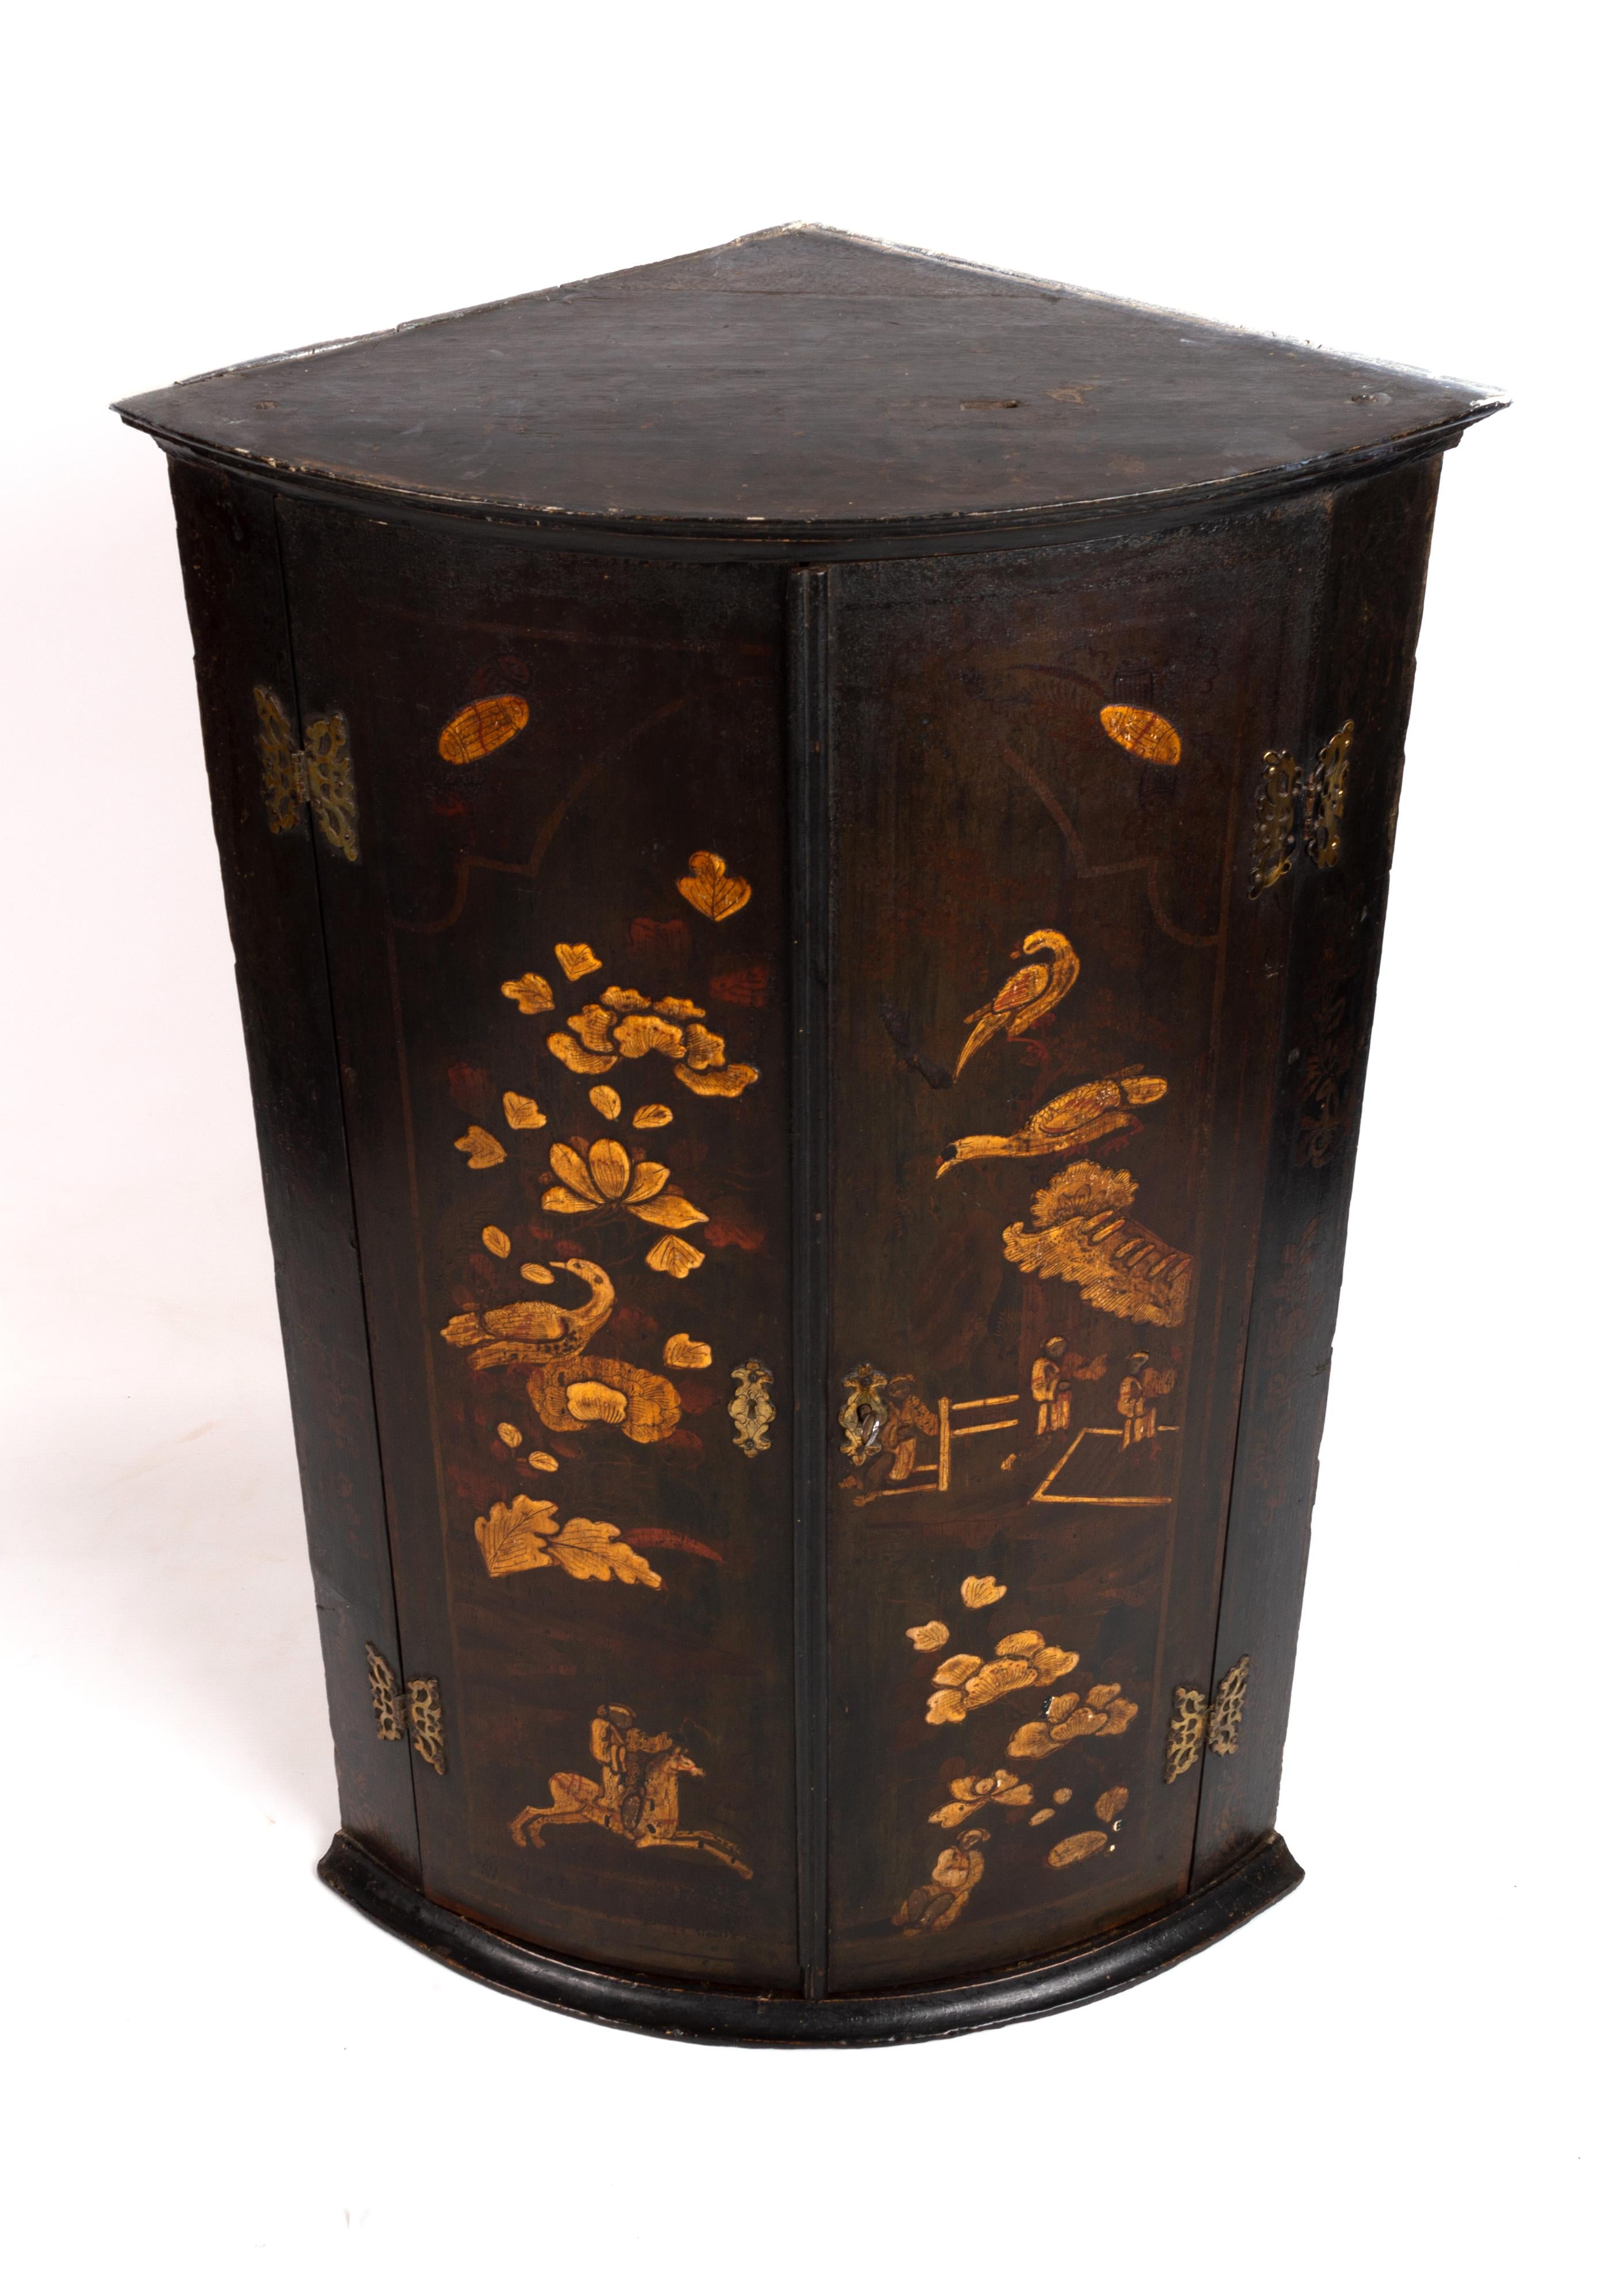 Antique English Georgian chinoiserie lacquered hanging bow front corner cupboard, 1780.

A George I period 18th century chinoiserie lacquered bowfronted corner cupboard; the corner cupboard's doors lacquered with oriental style raised gilt